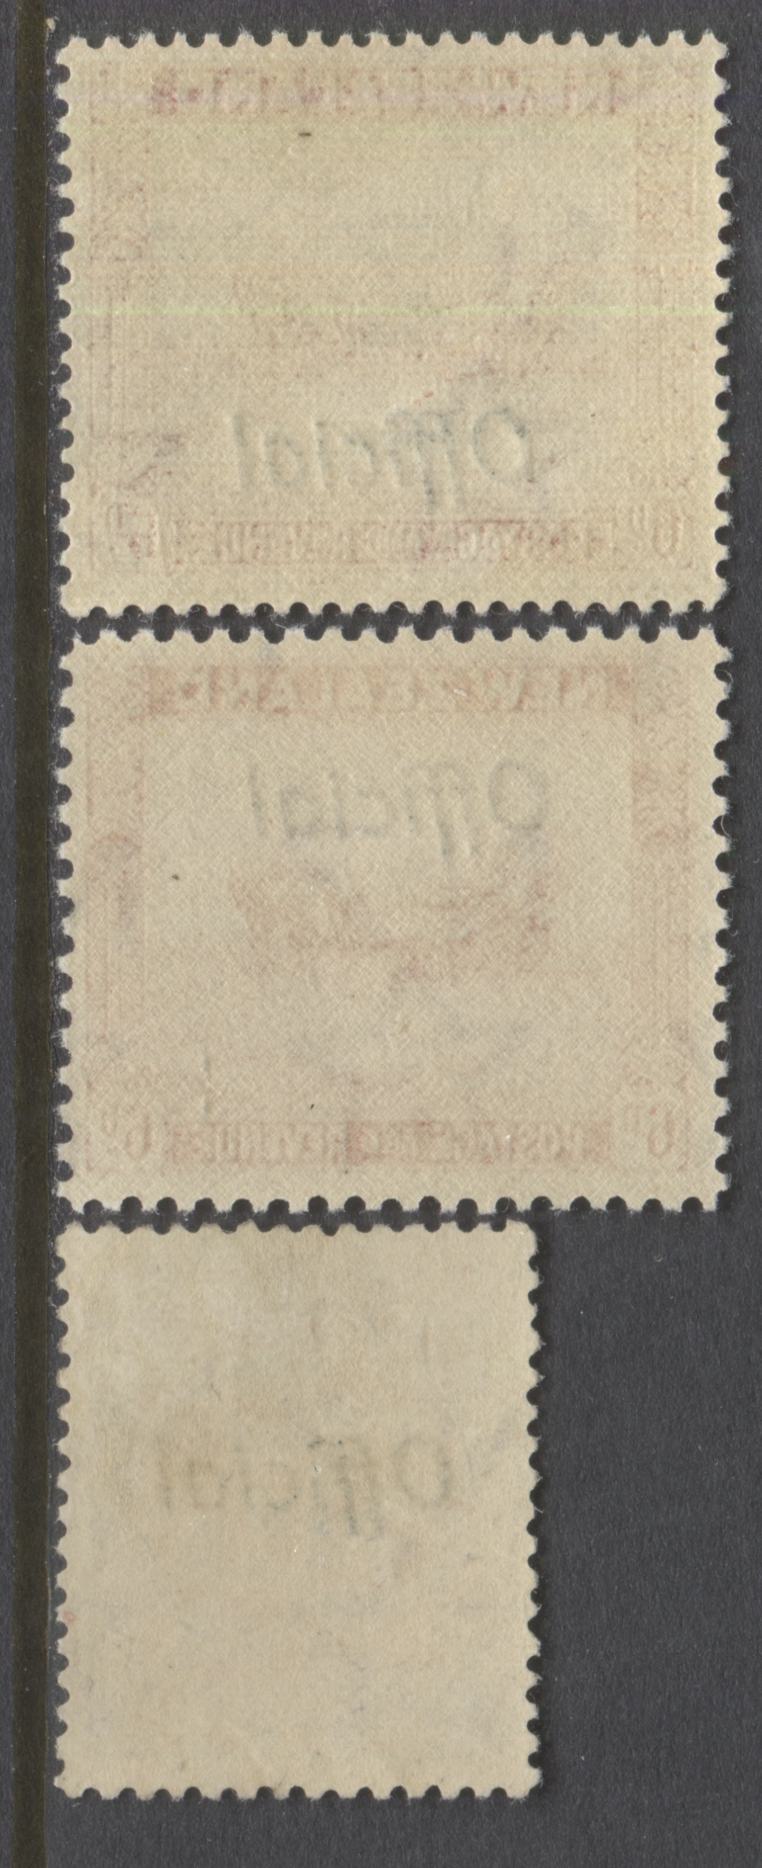 Lot 98 New Zealand SG#O127b-c, O130 1936-1961 Pictorial Issue With Official Overprint, A Partial Fine NH and VFNH Set. Mult NZ + Star Wmk, Multiple Perfs, SG. Cat. 51 GBP = $87.72